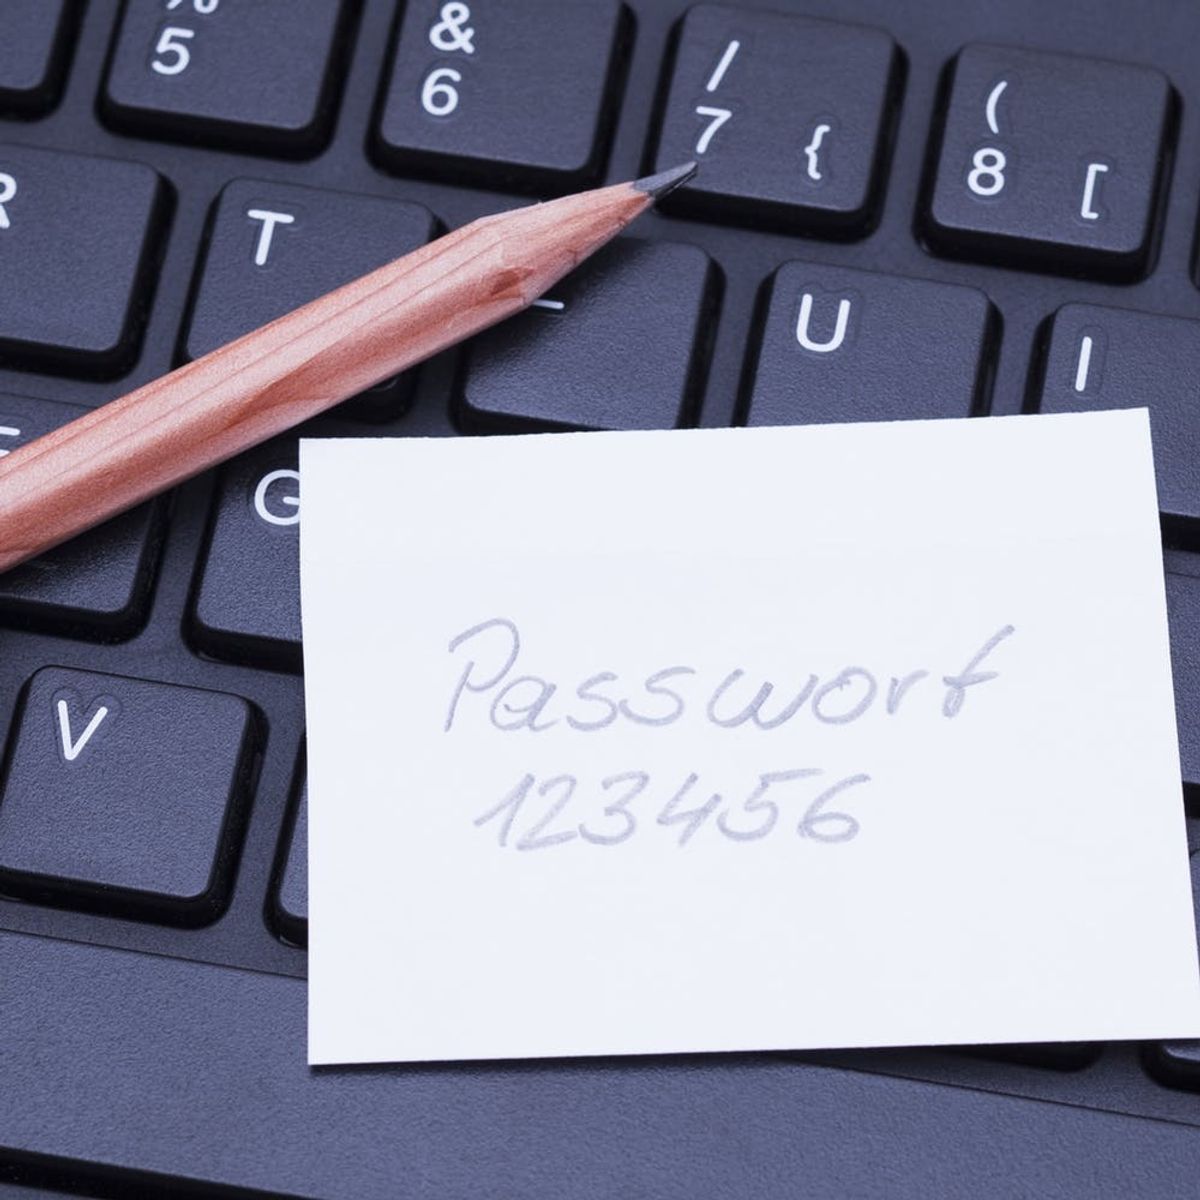 Don’t Use These 25 Passwords If You Don’t Want to Get Hacked